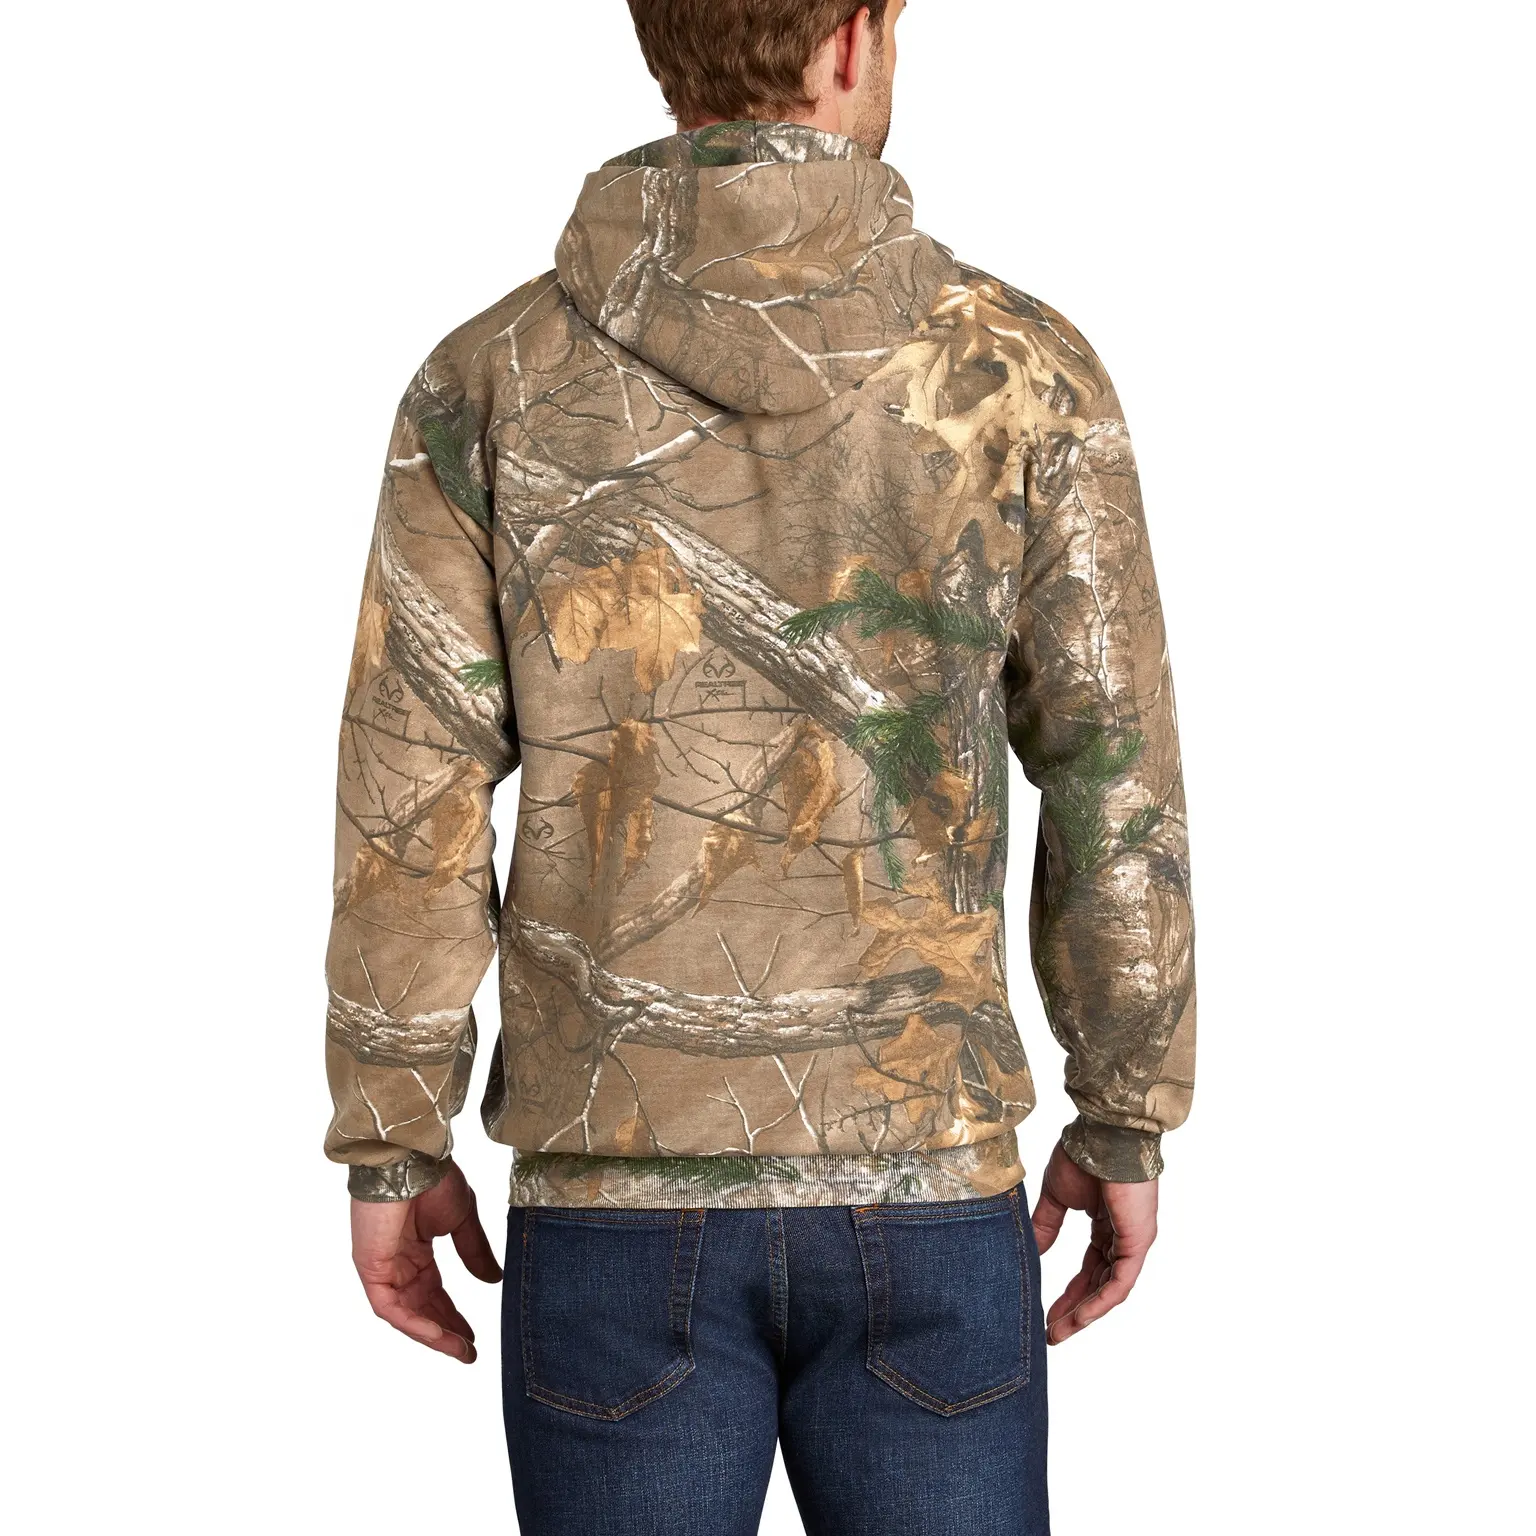 Hot Sale Custom Embroidered Oversized Men's Hoodies Real Tree Printed Camo Hunting Jungle Printed Camping Forest Men's Hoodies